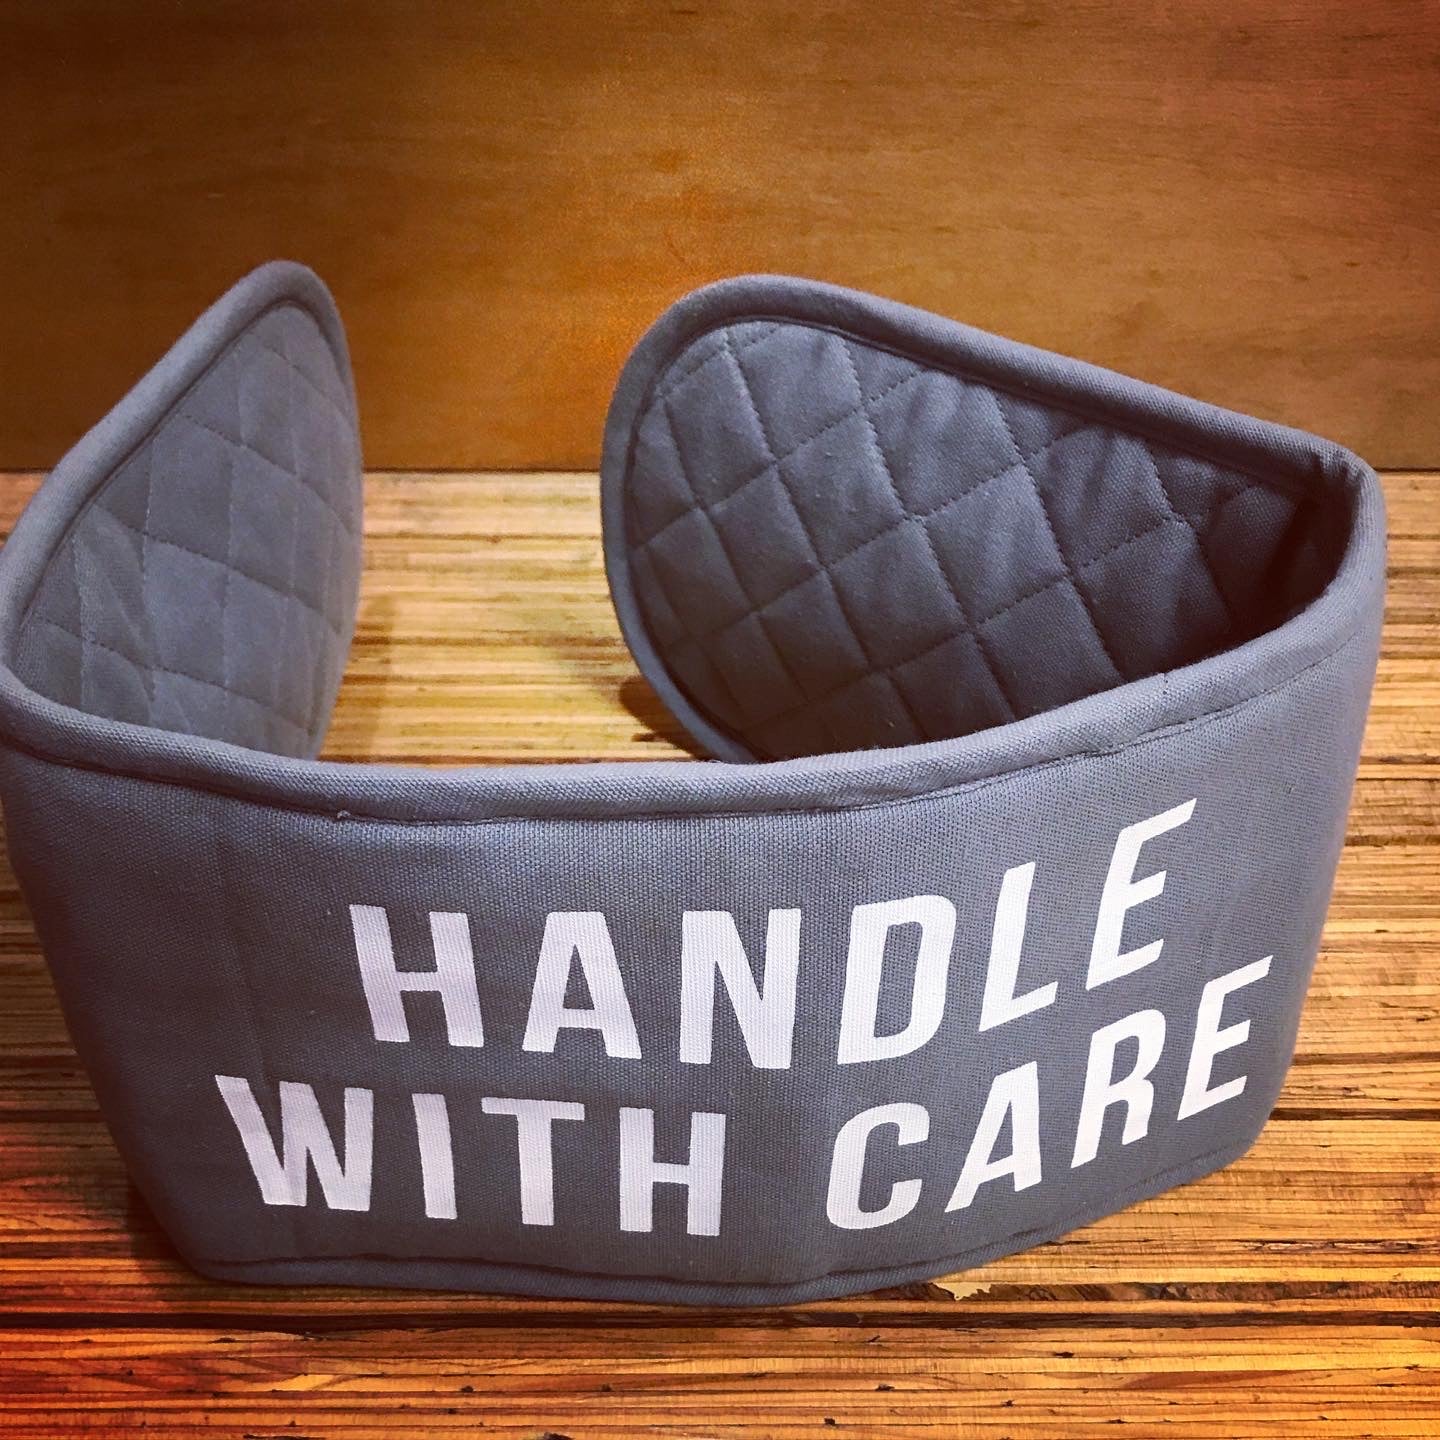 "Handle with care" Oven mitts by The School of Life (UK)